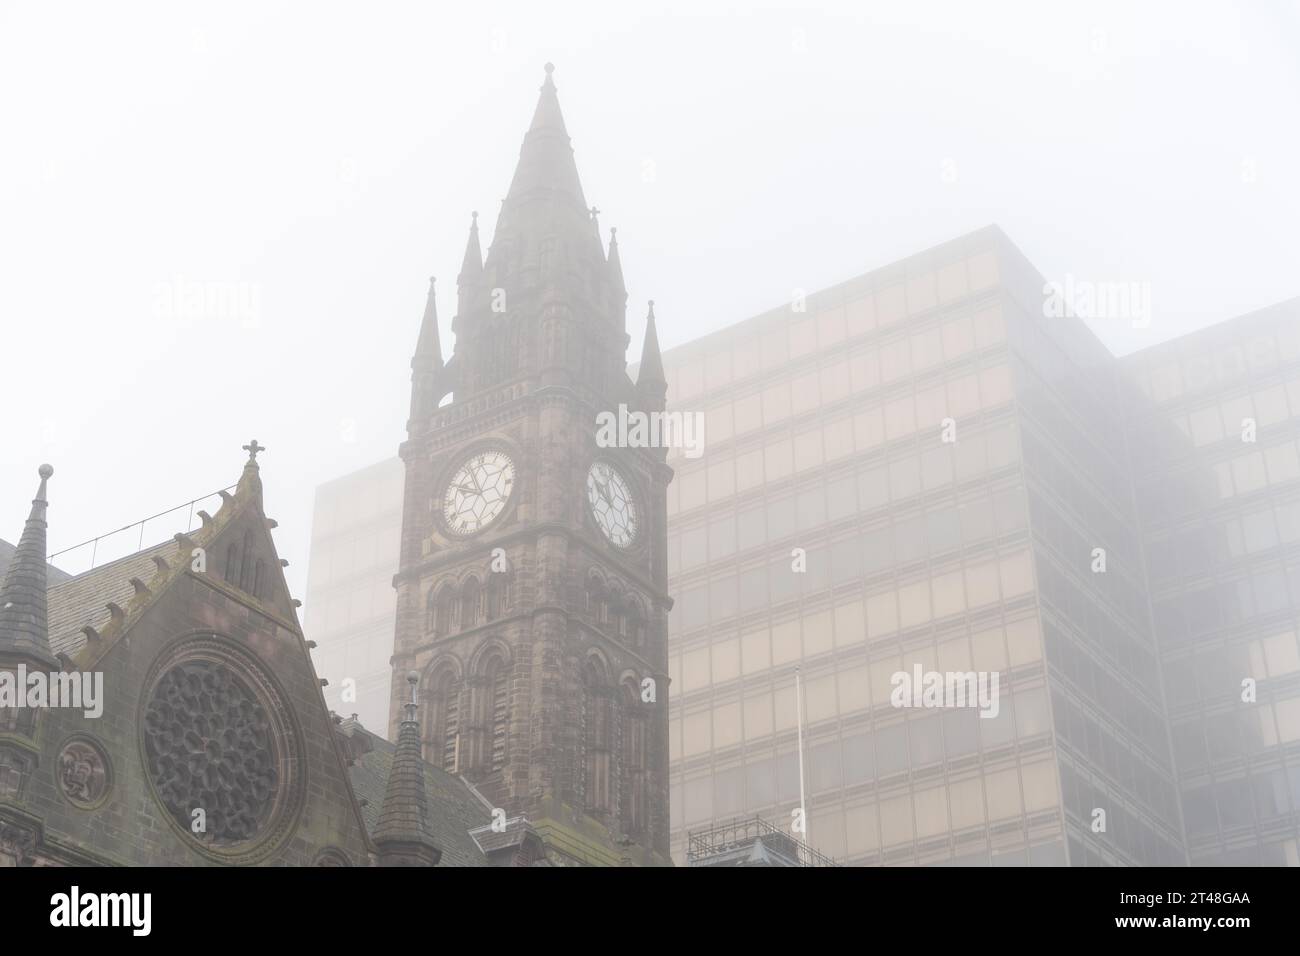 The clock tower of Middlesbrough Town Hall and the high rise Centre North East building - contrasting architecture in Middlesbrough, UK Stock Photo